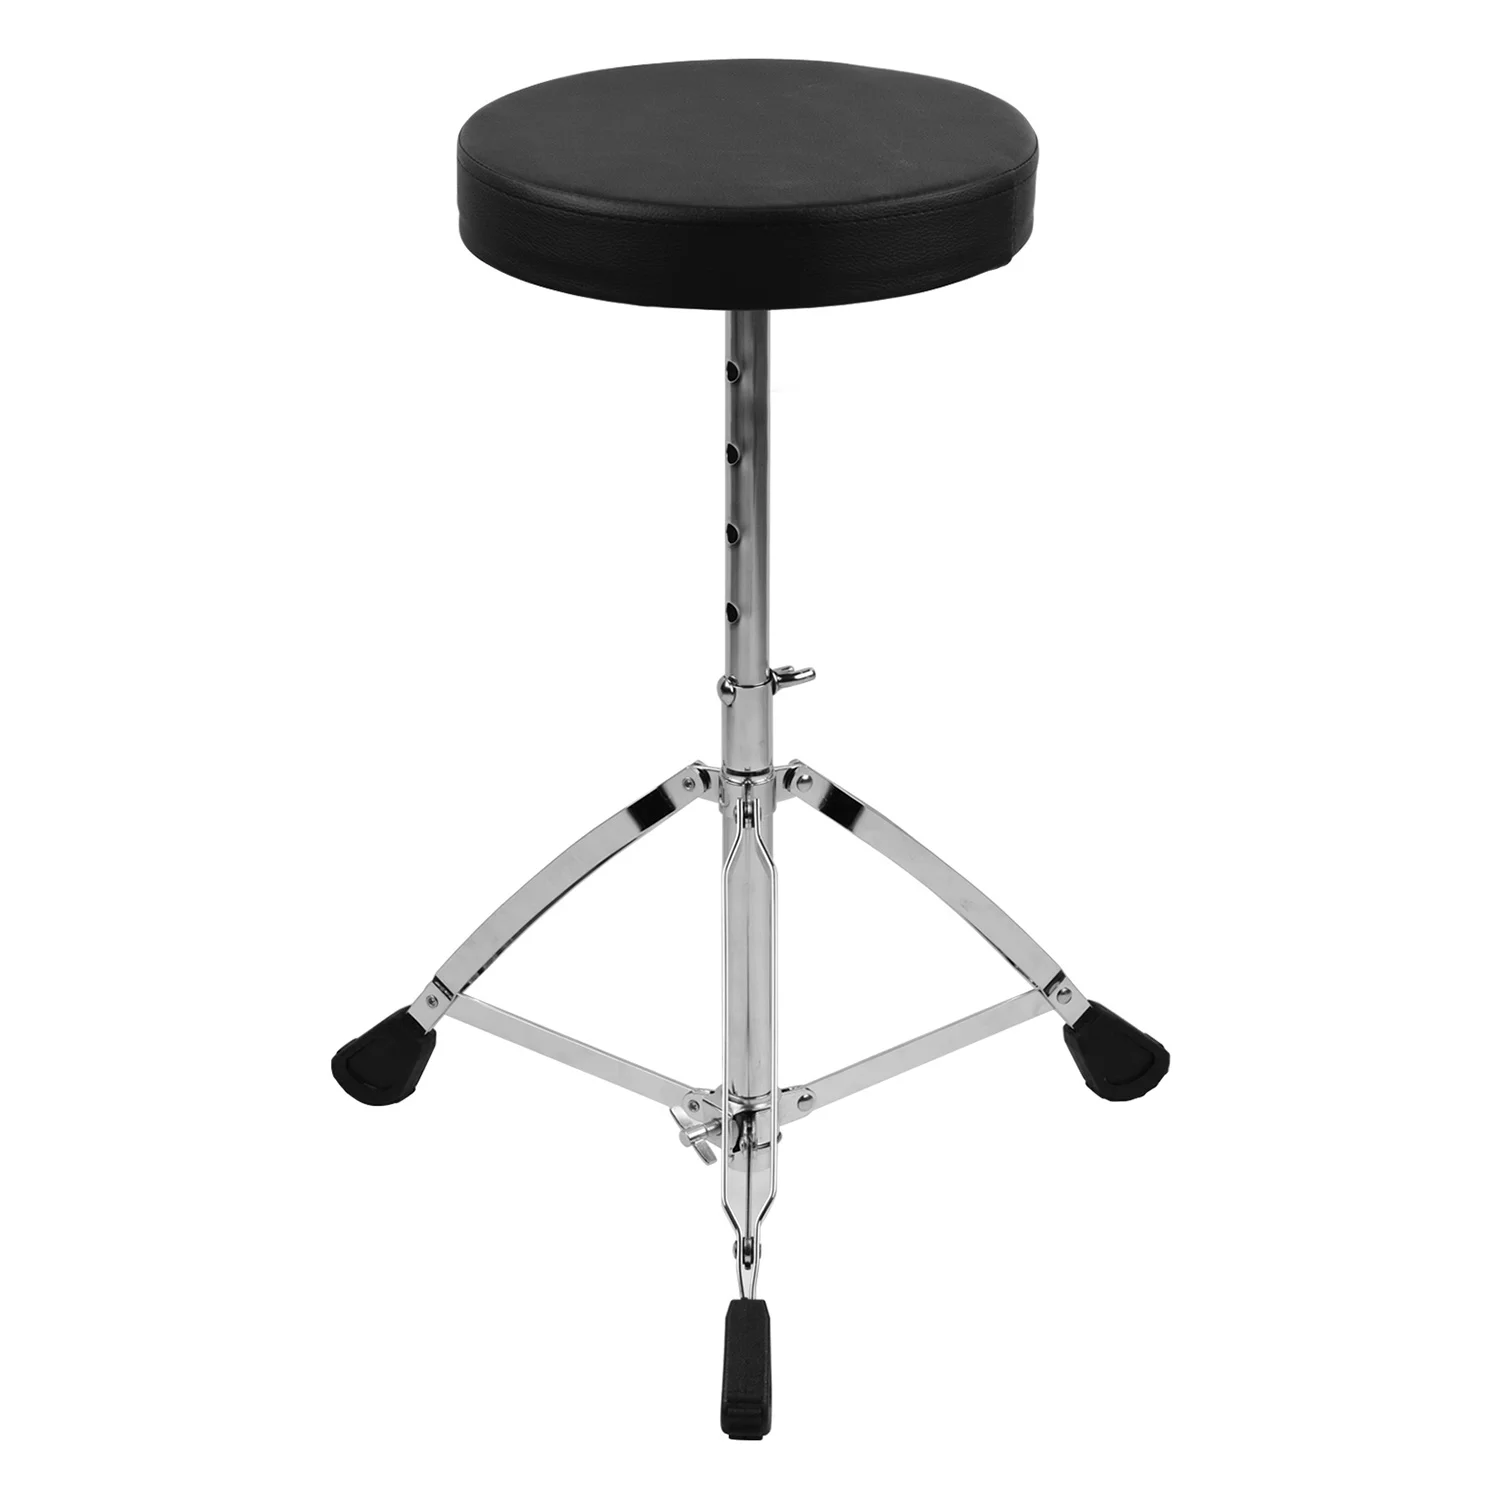 

Adult Universal Drum Throne Round Padded Drum Seat Stool Double-braced Stainless Steel Legs 5 Levels Adajustable Height